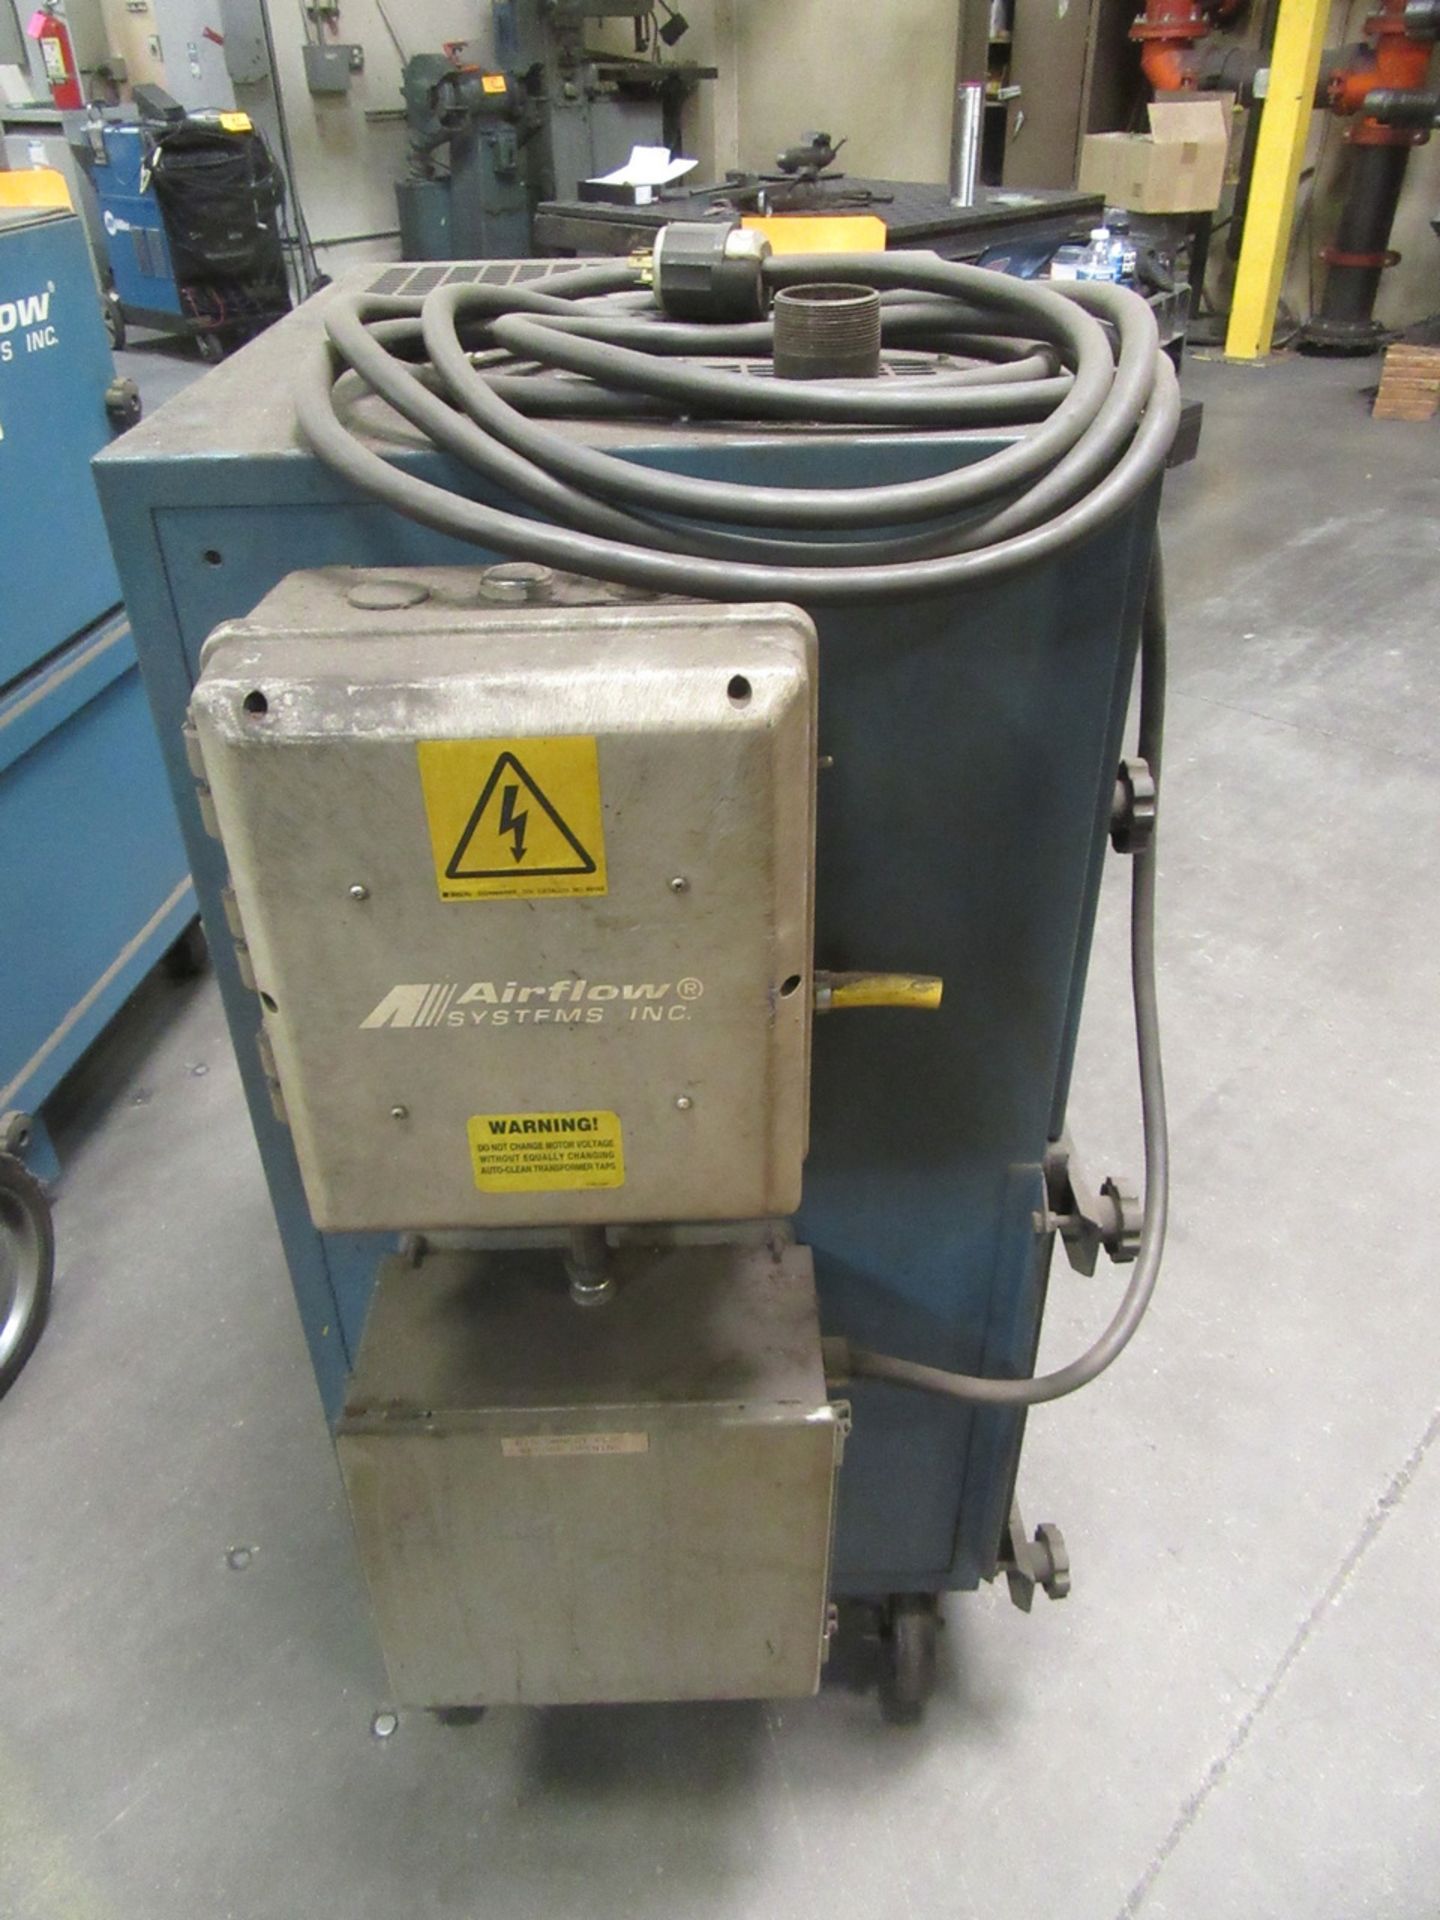 Airflow Systems Inc Portable Dust Collector - Image 2 of 2